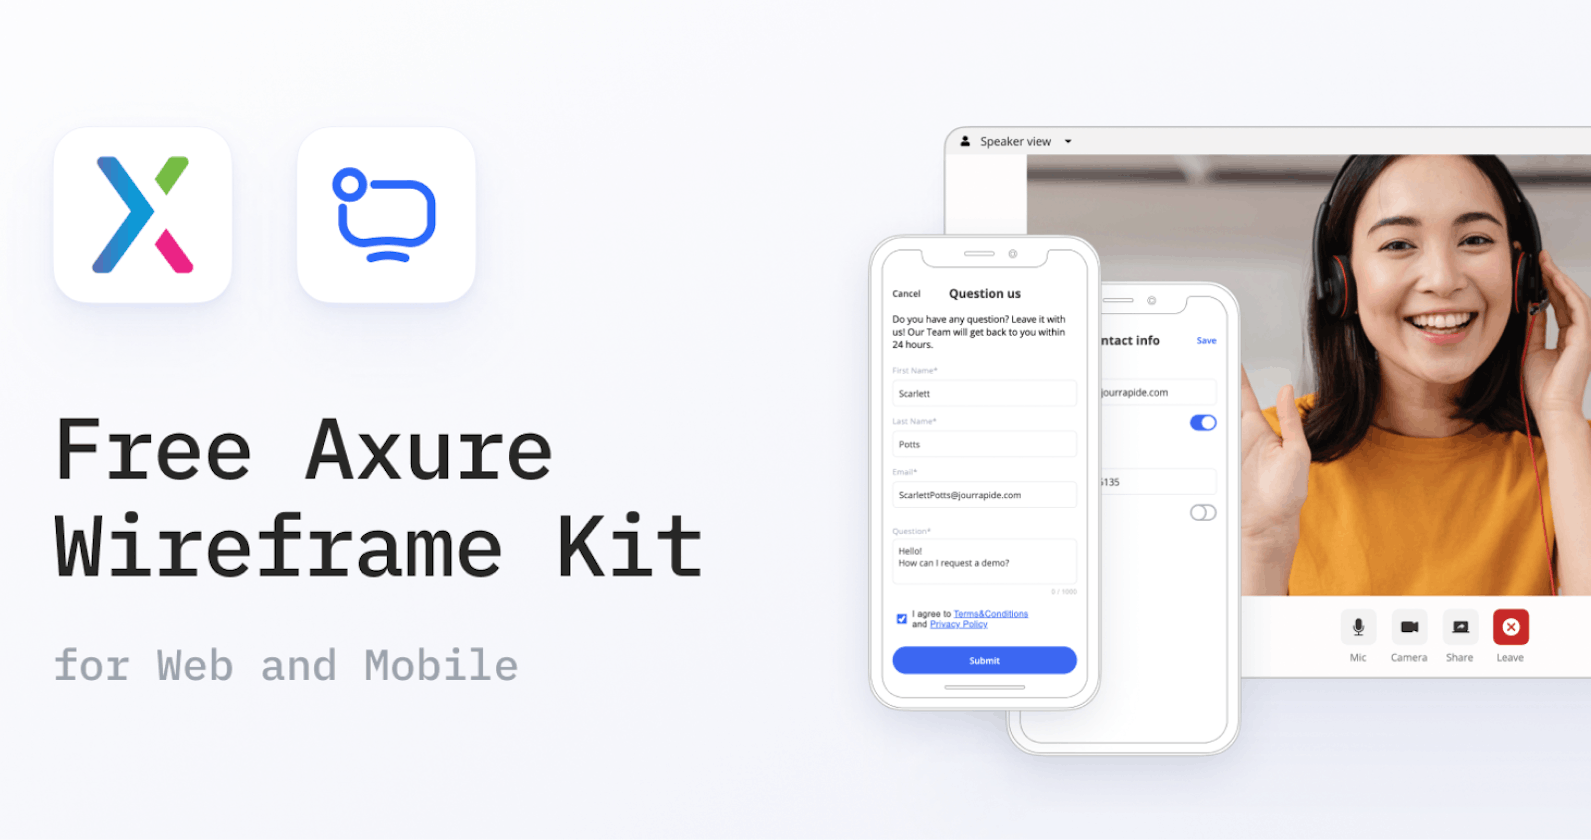 Free Axure Wireframe Kit for Web and Mobile Development